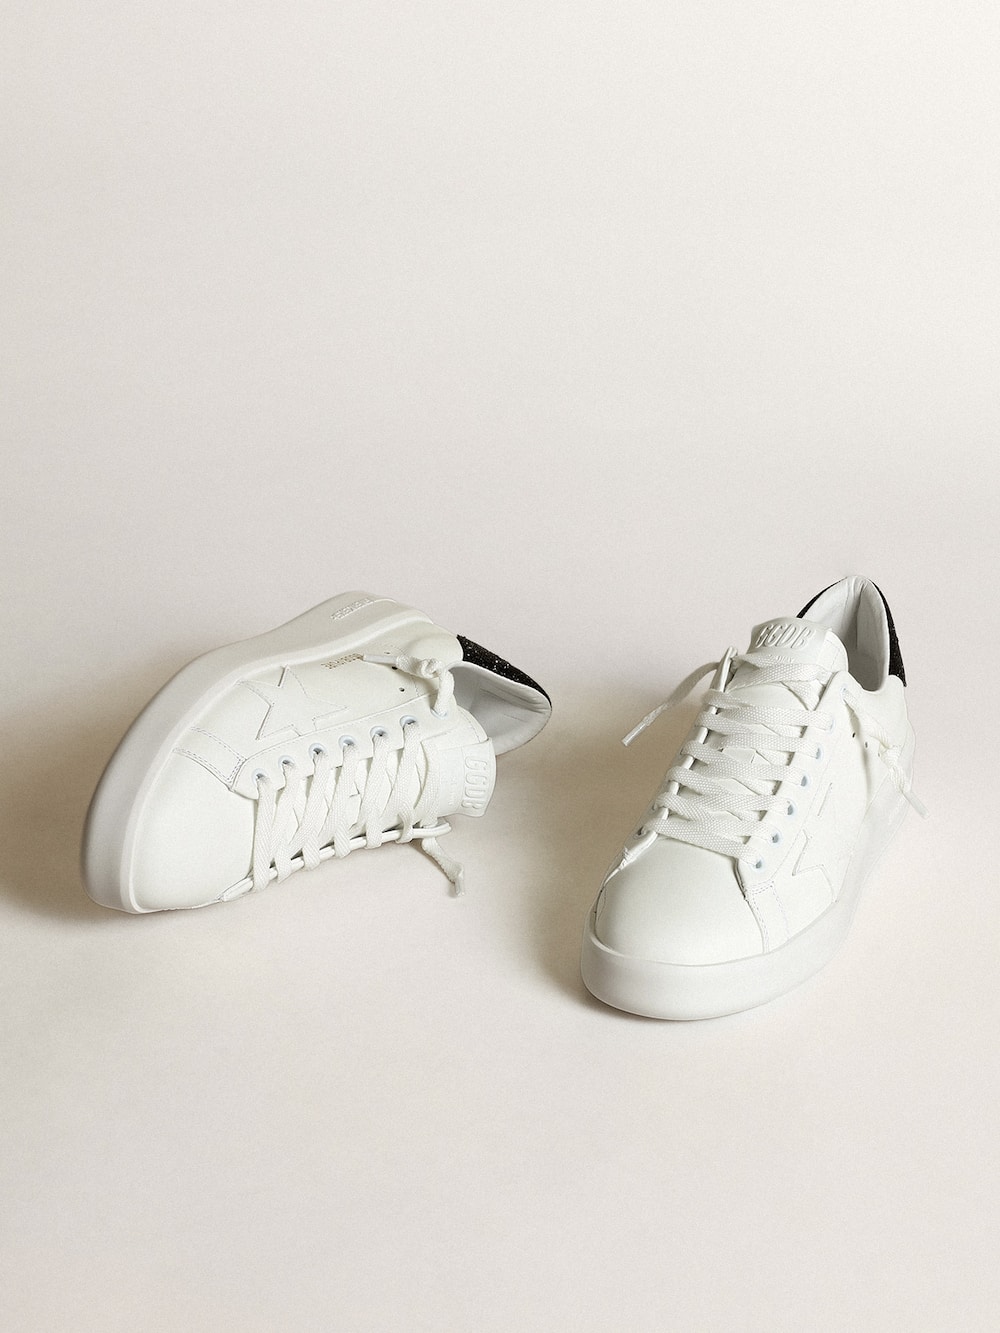 Golden Goose - Purestar in white leather with tone-on-tone star and heel tab in black Swarovski crystals in 